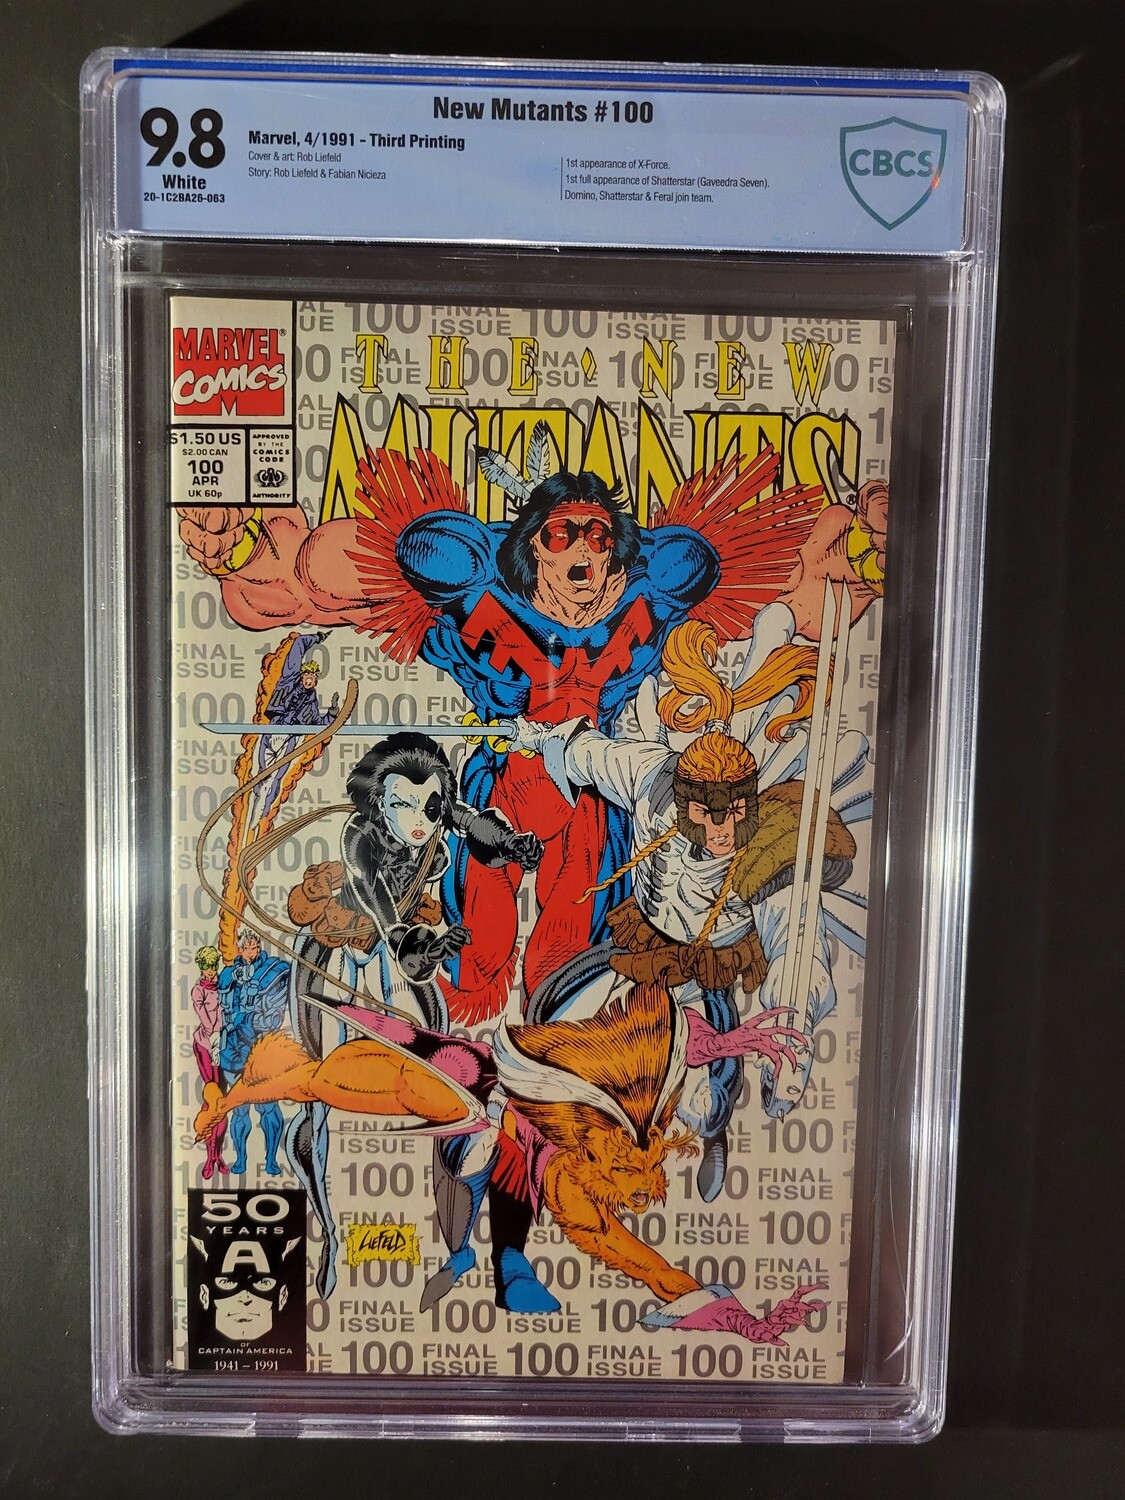 New Mutants #100 (3rd Printing) CBCS 9.8 1st cameo appearance of the X-Force